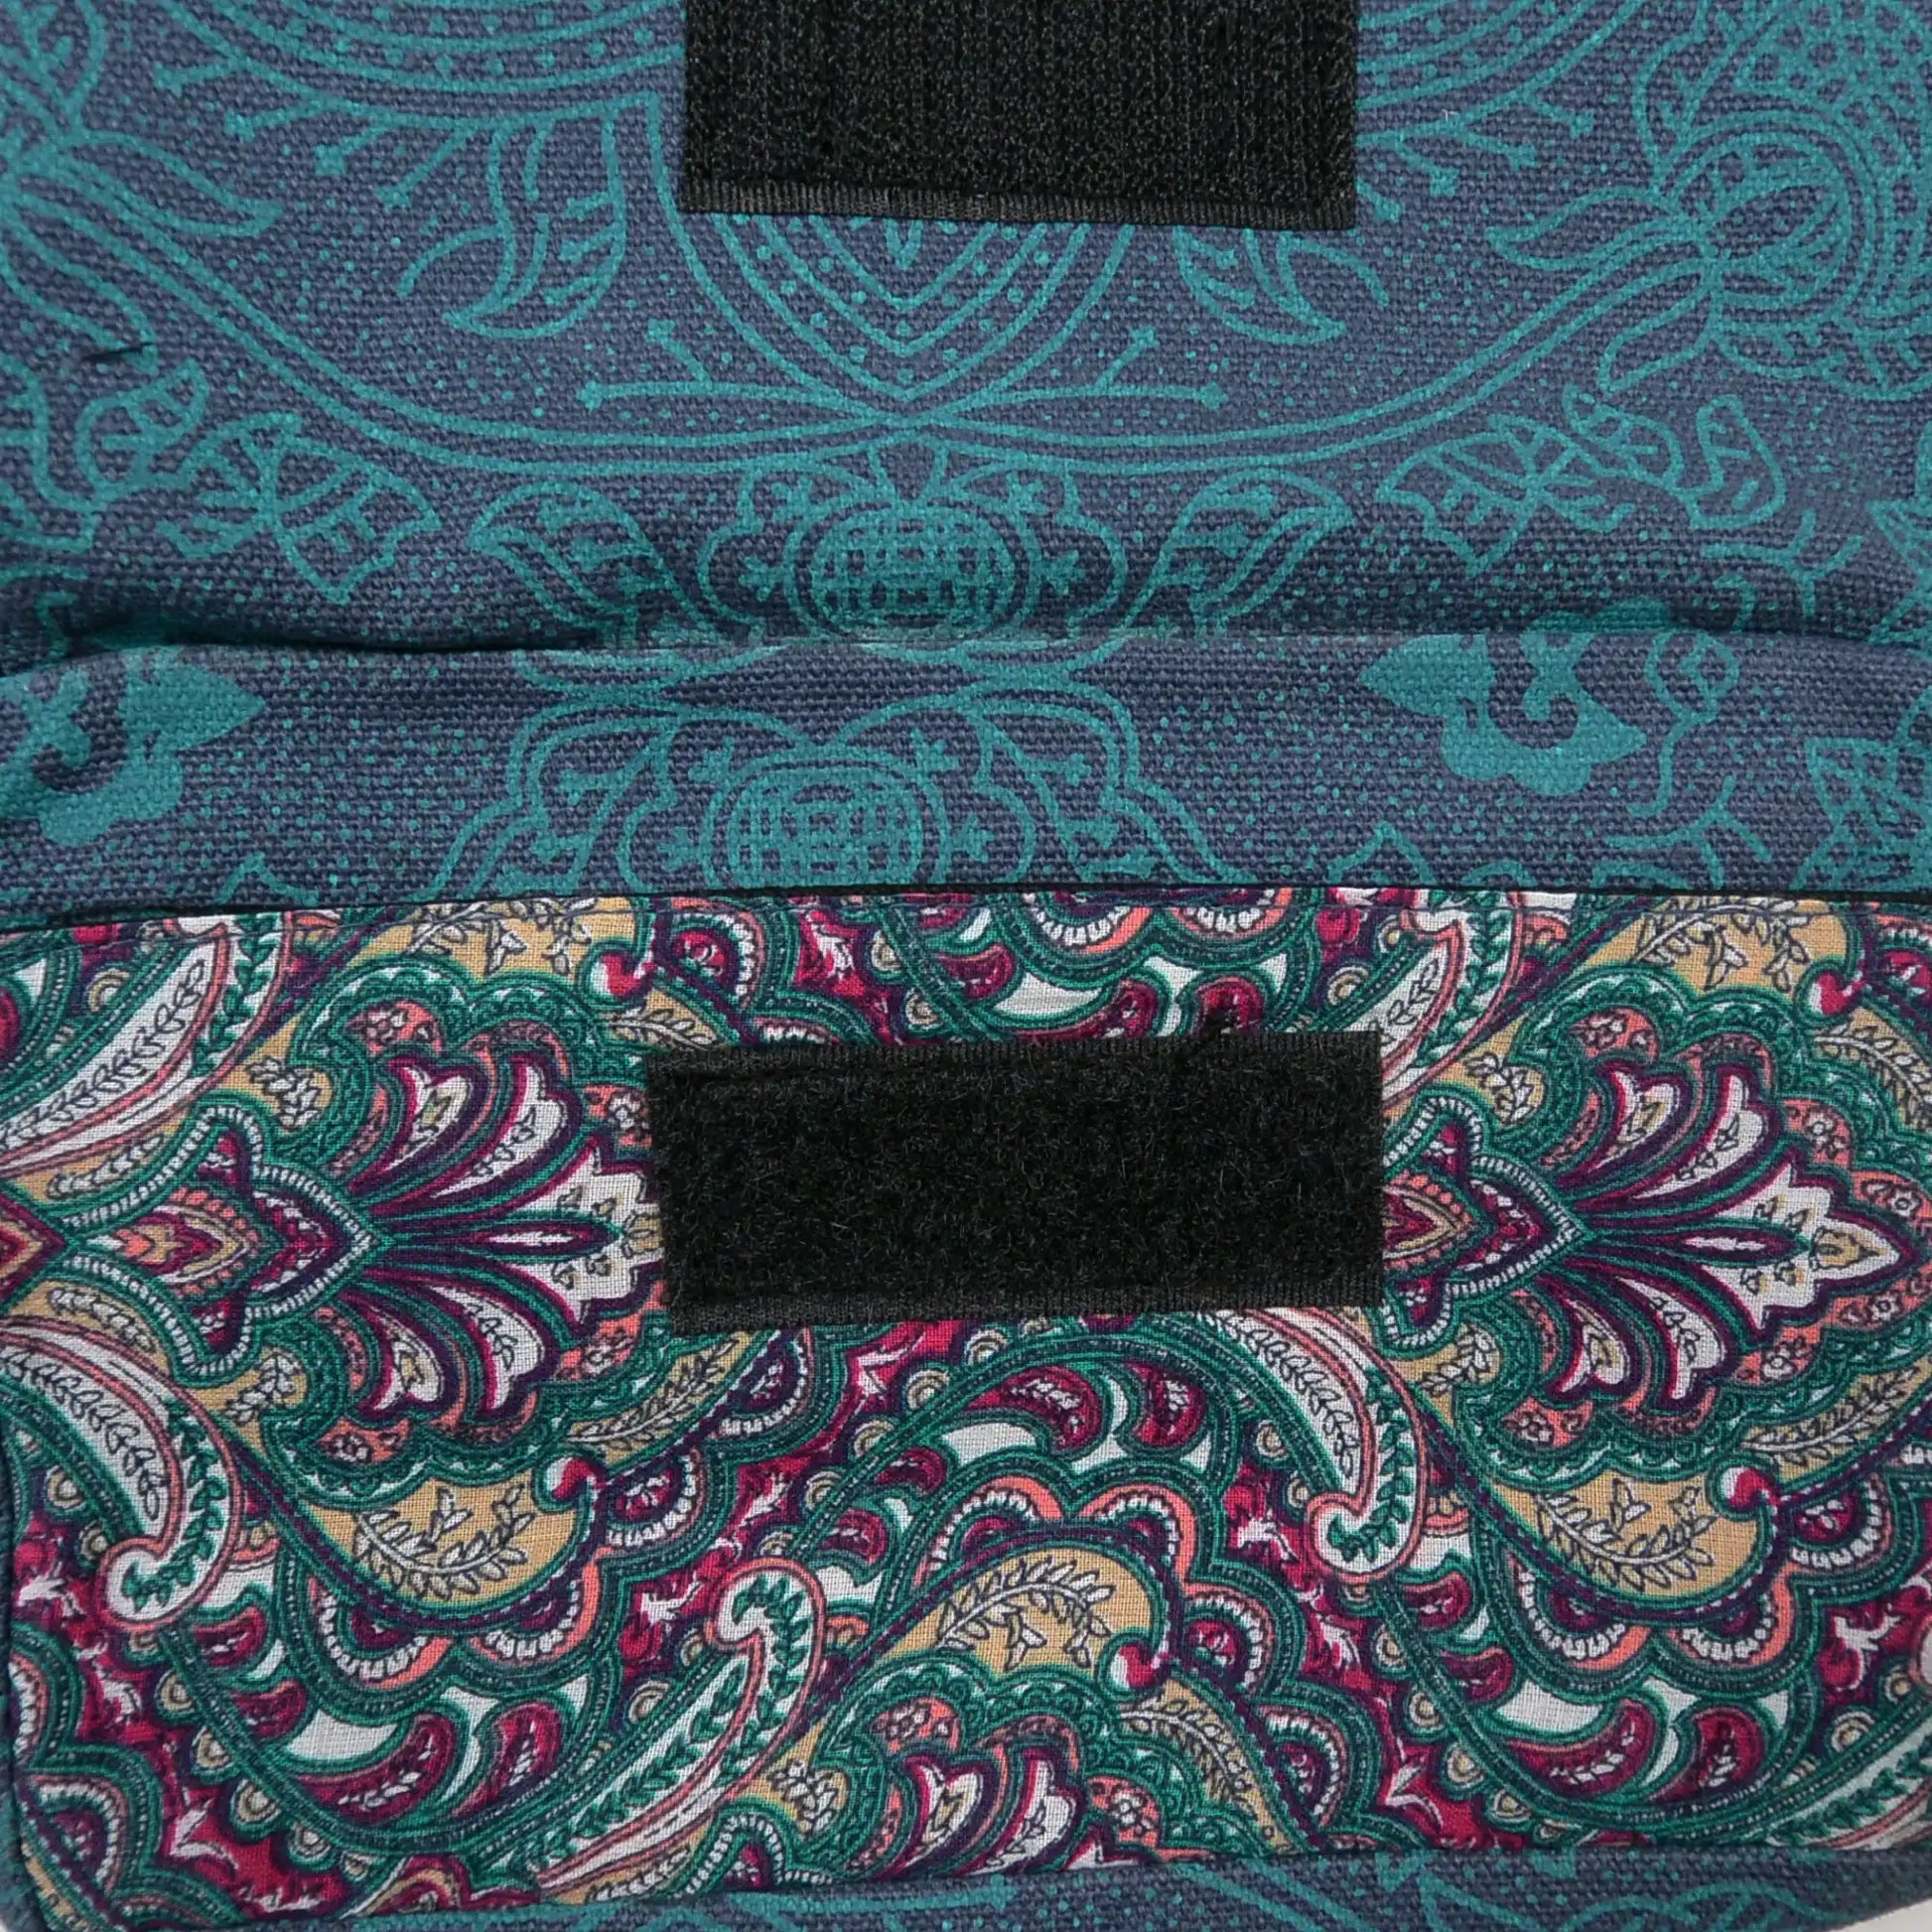 Bauchtasche Petrol Farbe Paisley